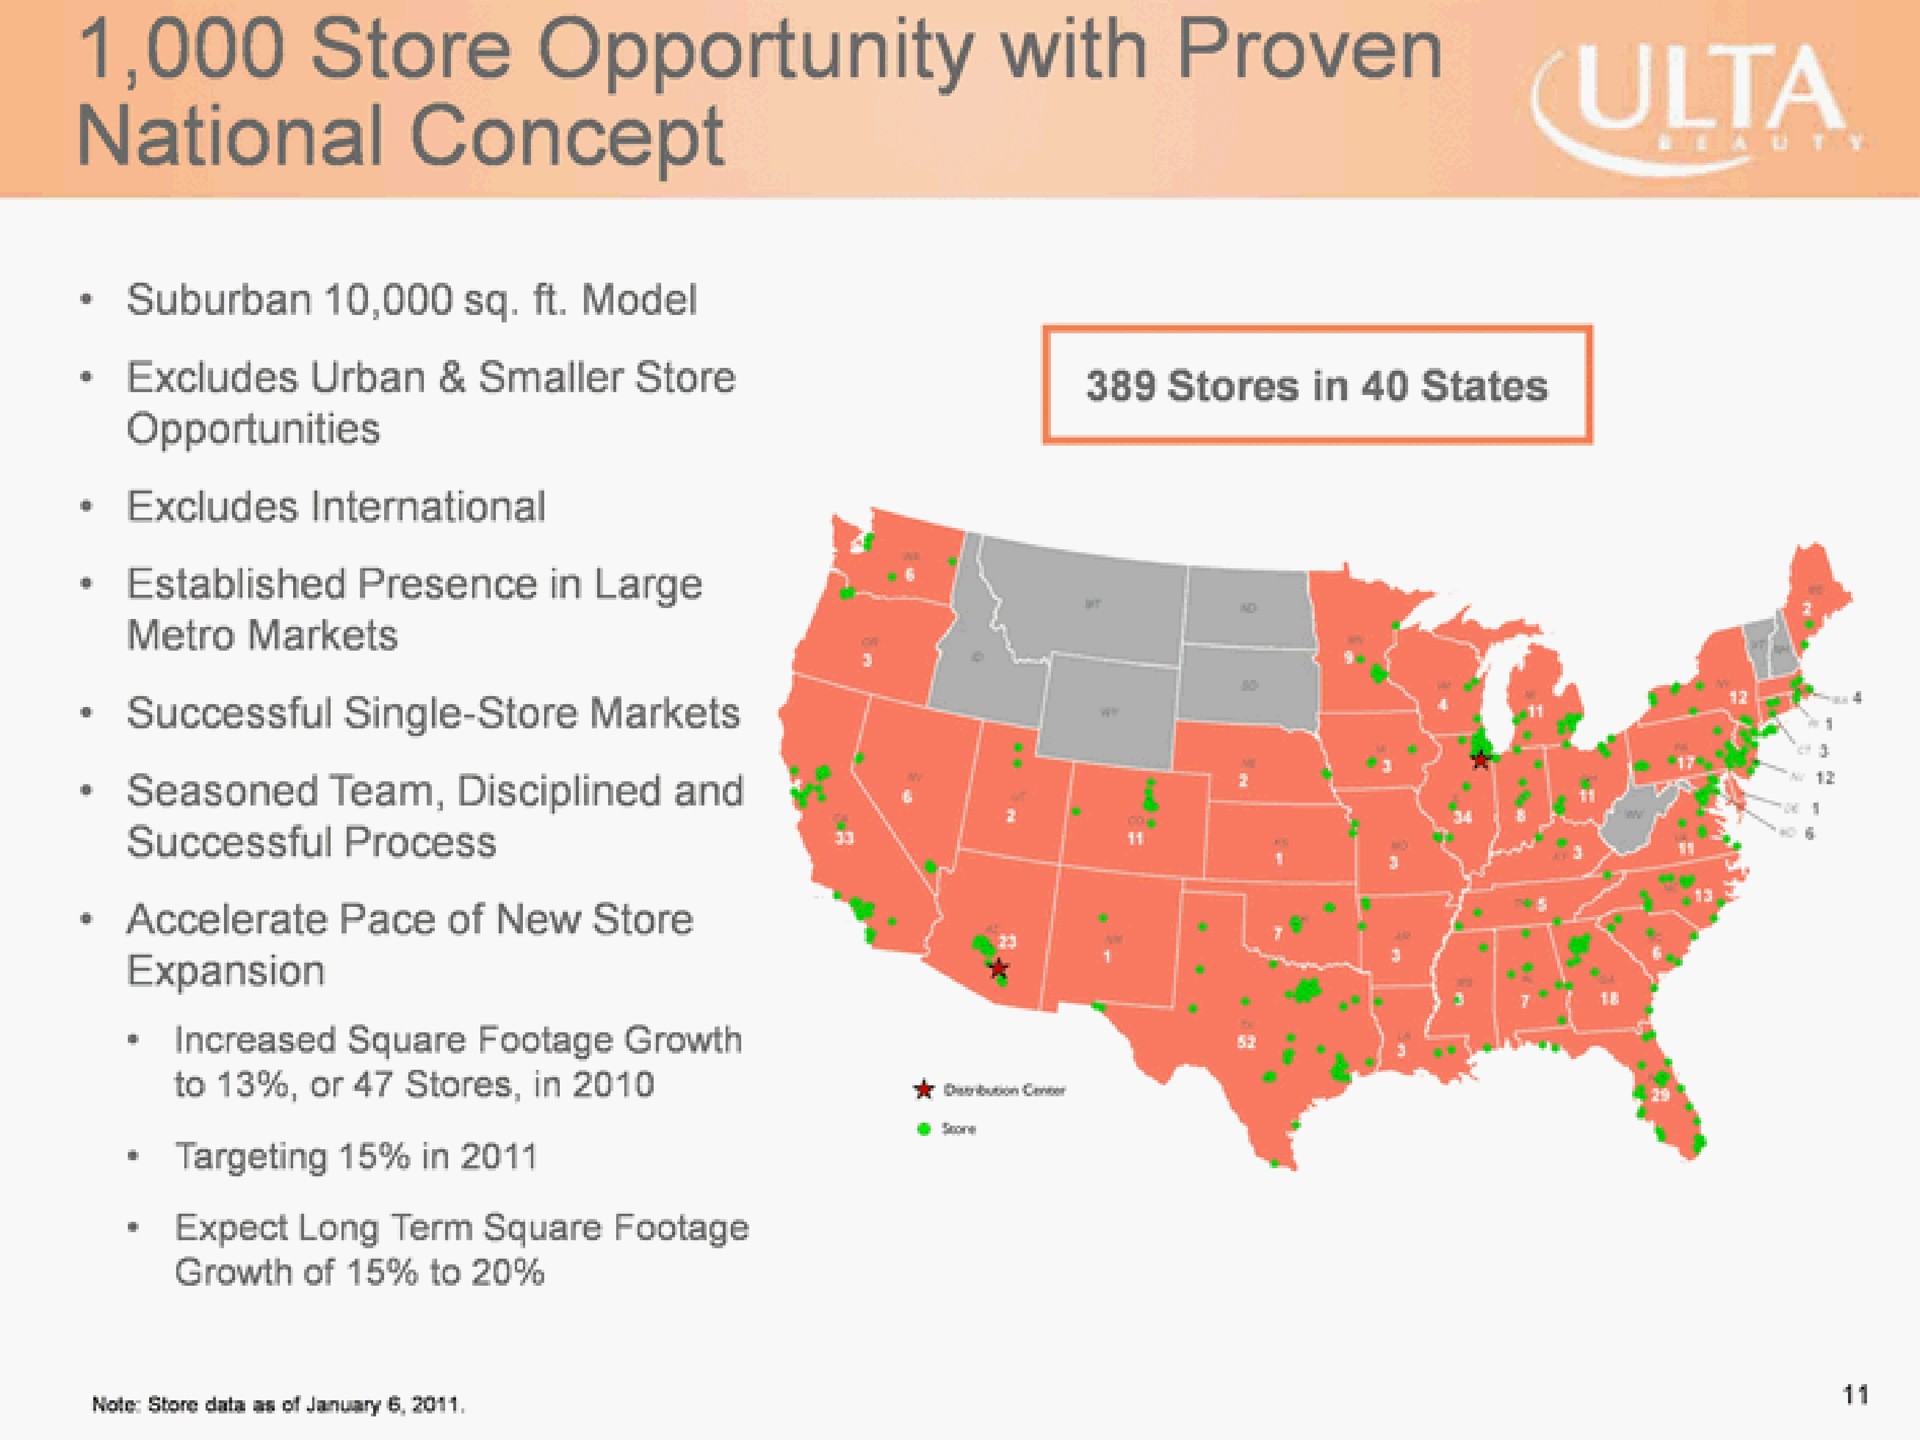 store opportunity with proven national concept | Ulta Beauty